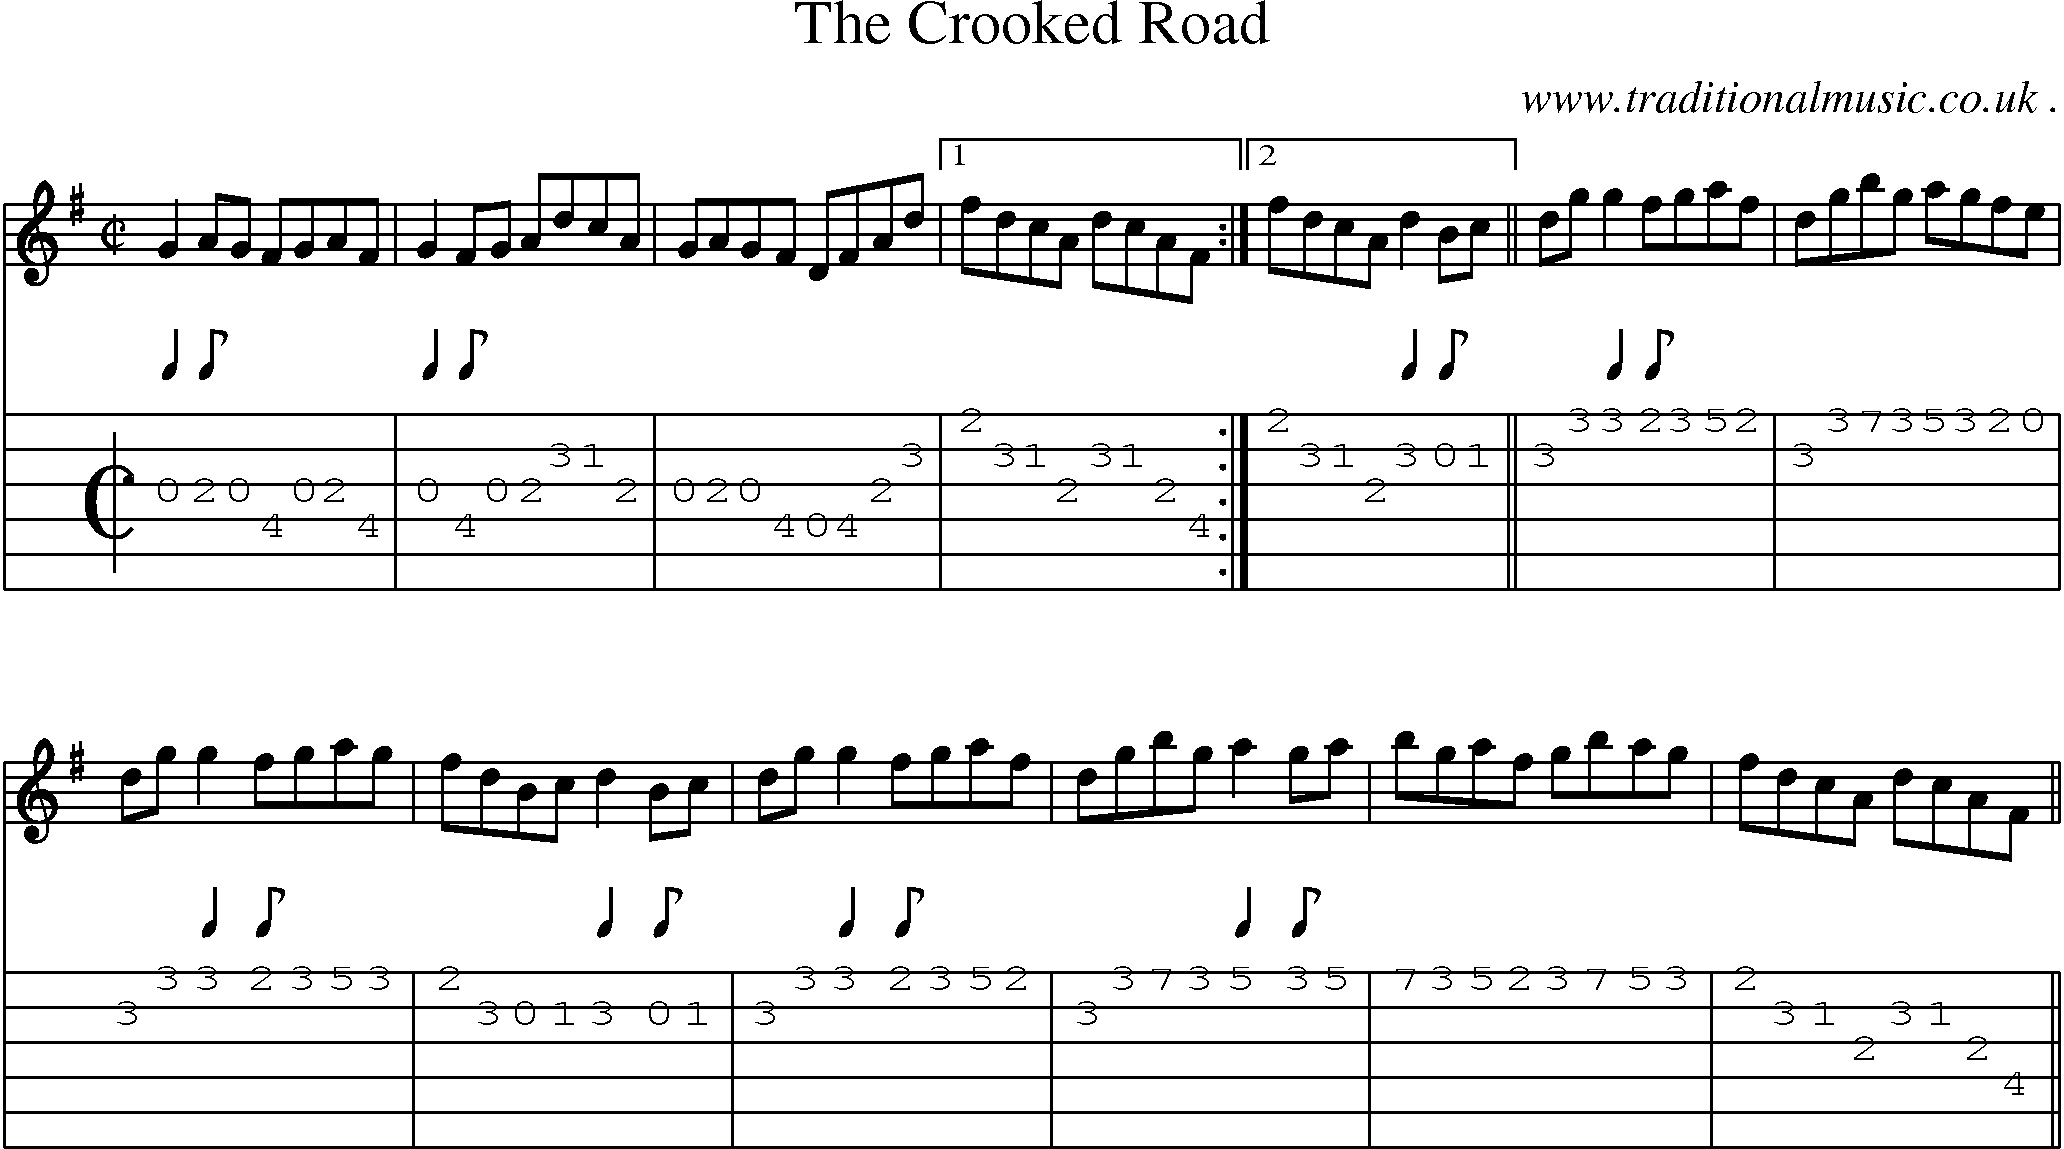 Sheet-Music and Guitar Tabs for The Crooked Road